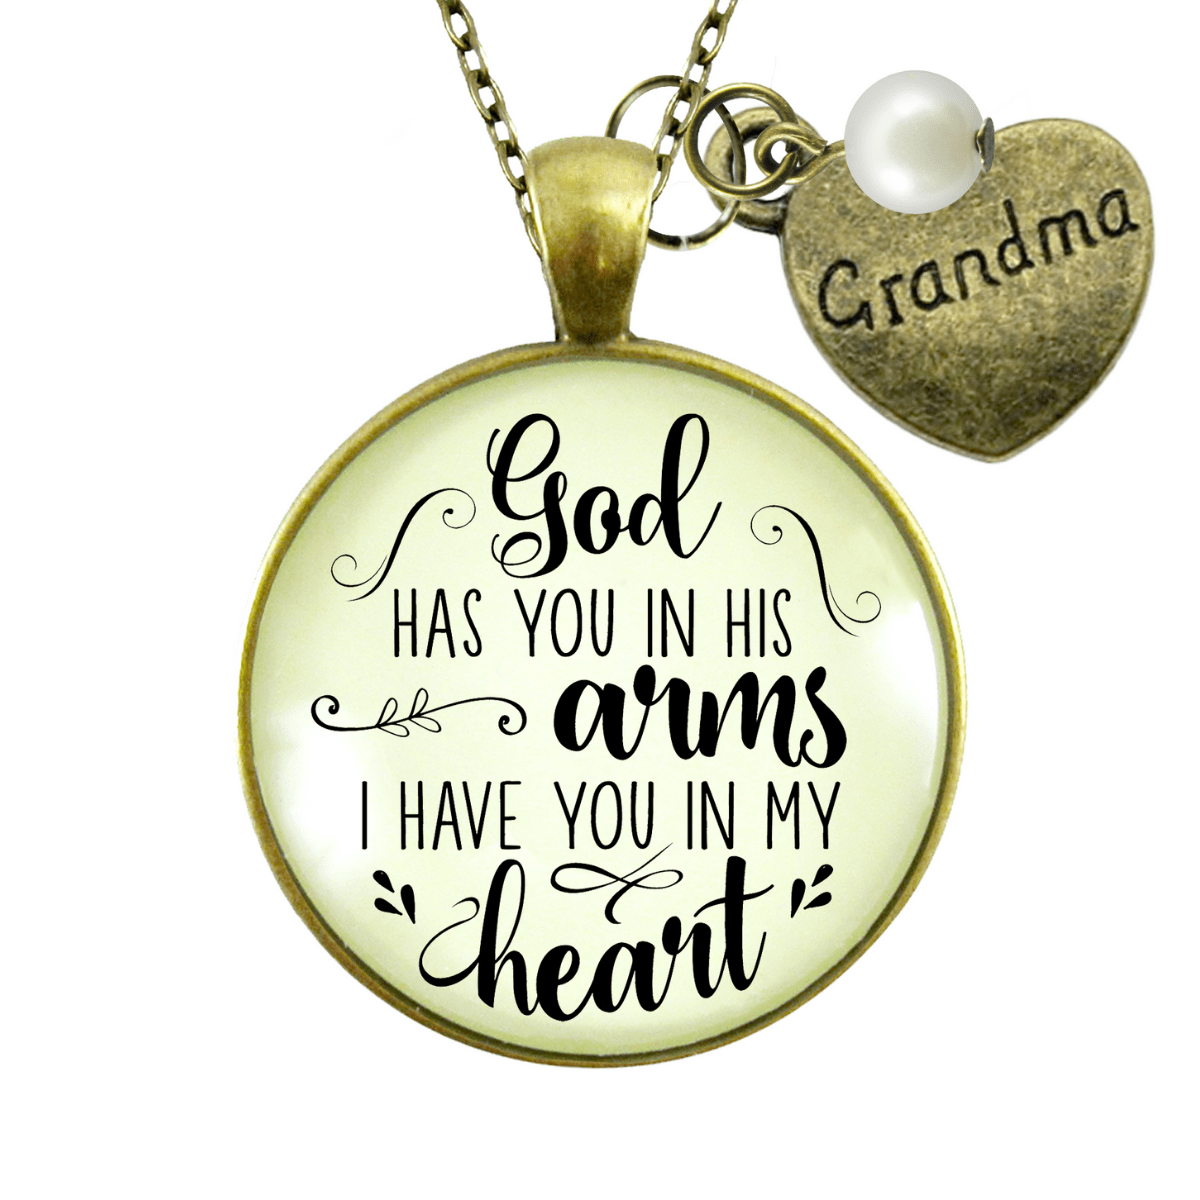 Gutsy Goodness Grandma Memorial Necklace God Has You In His Arms Grandmother Heart Gift - Gutsy Goodness;Grandma Memorial Necklace God Has You In His Arms Grandmother Heart Gift - Gutsy Goodness Handmade Jewelry Gifts